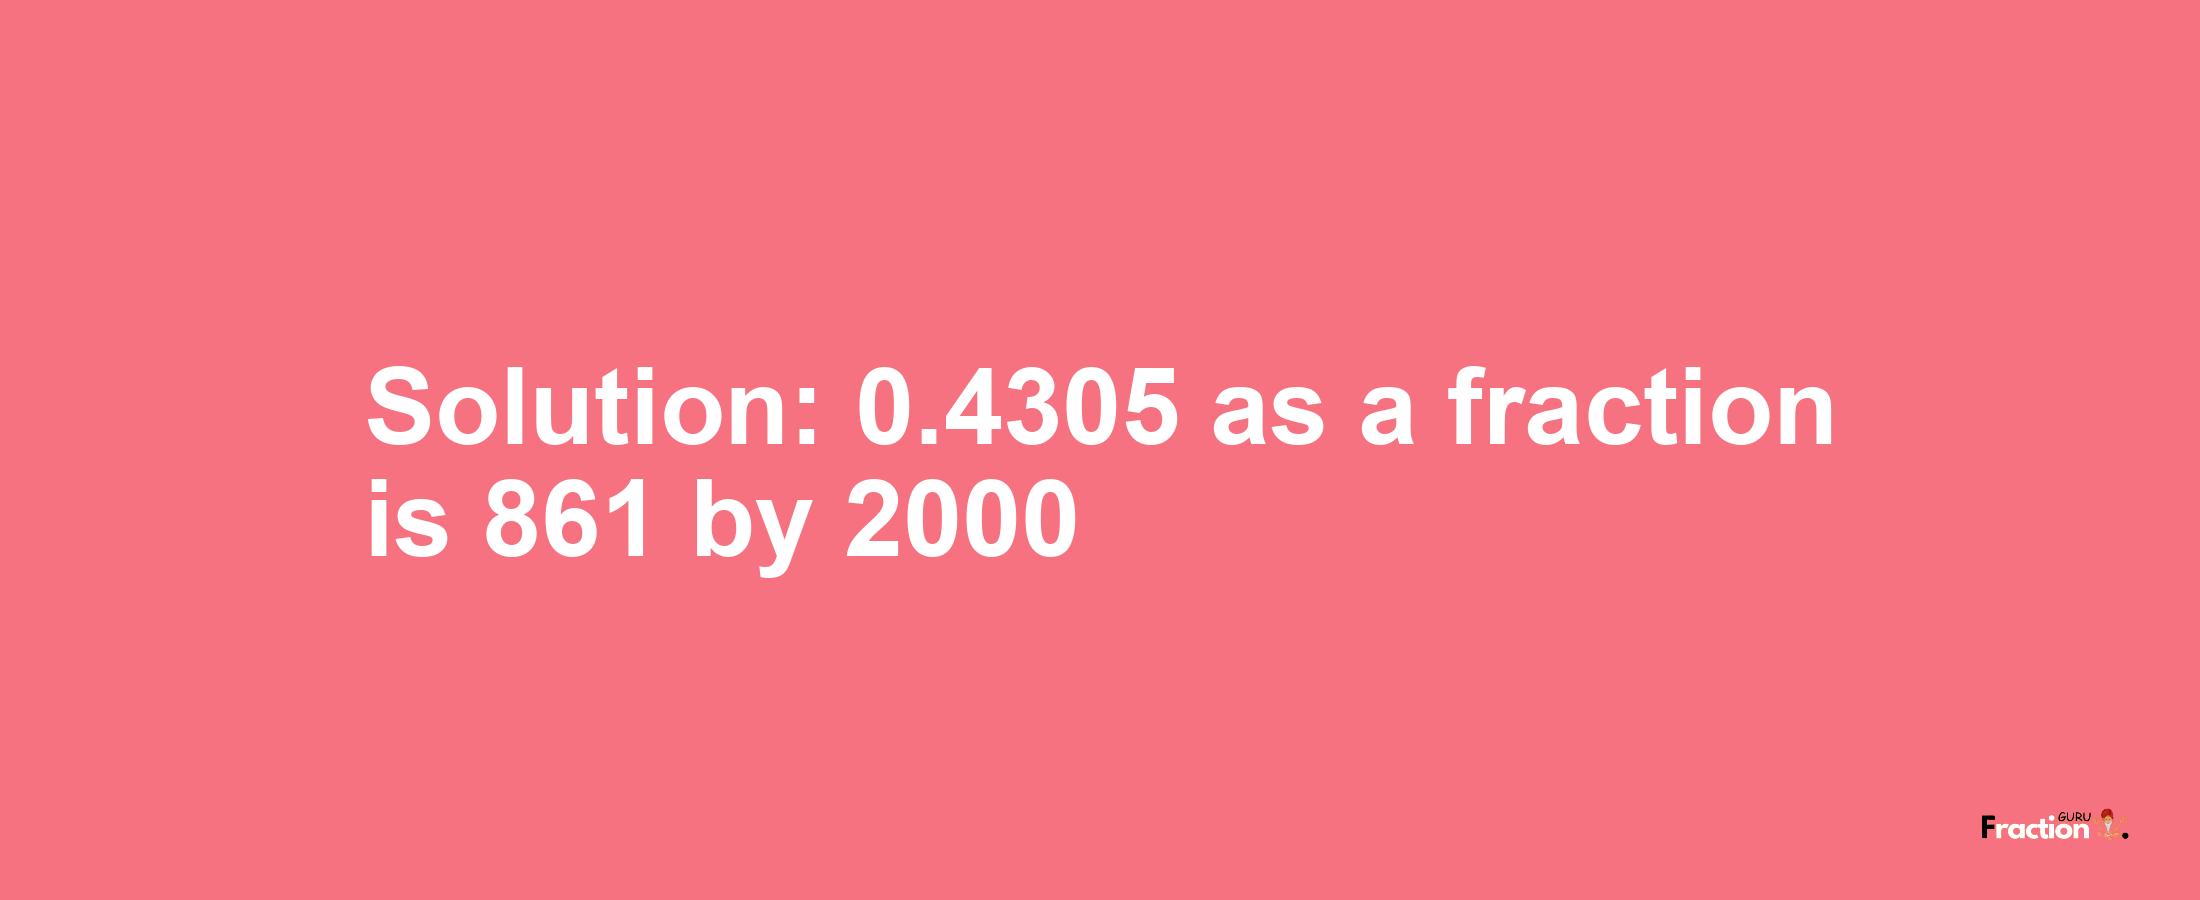 Solution:0.4305 as a fraction is 861/2000